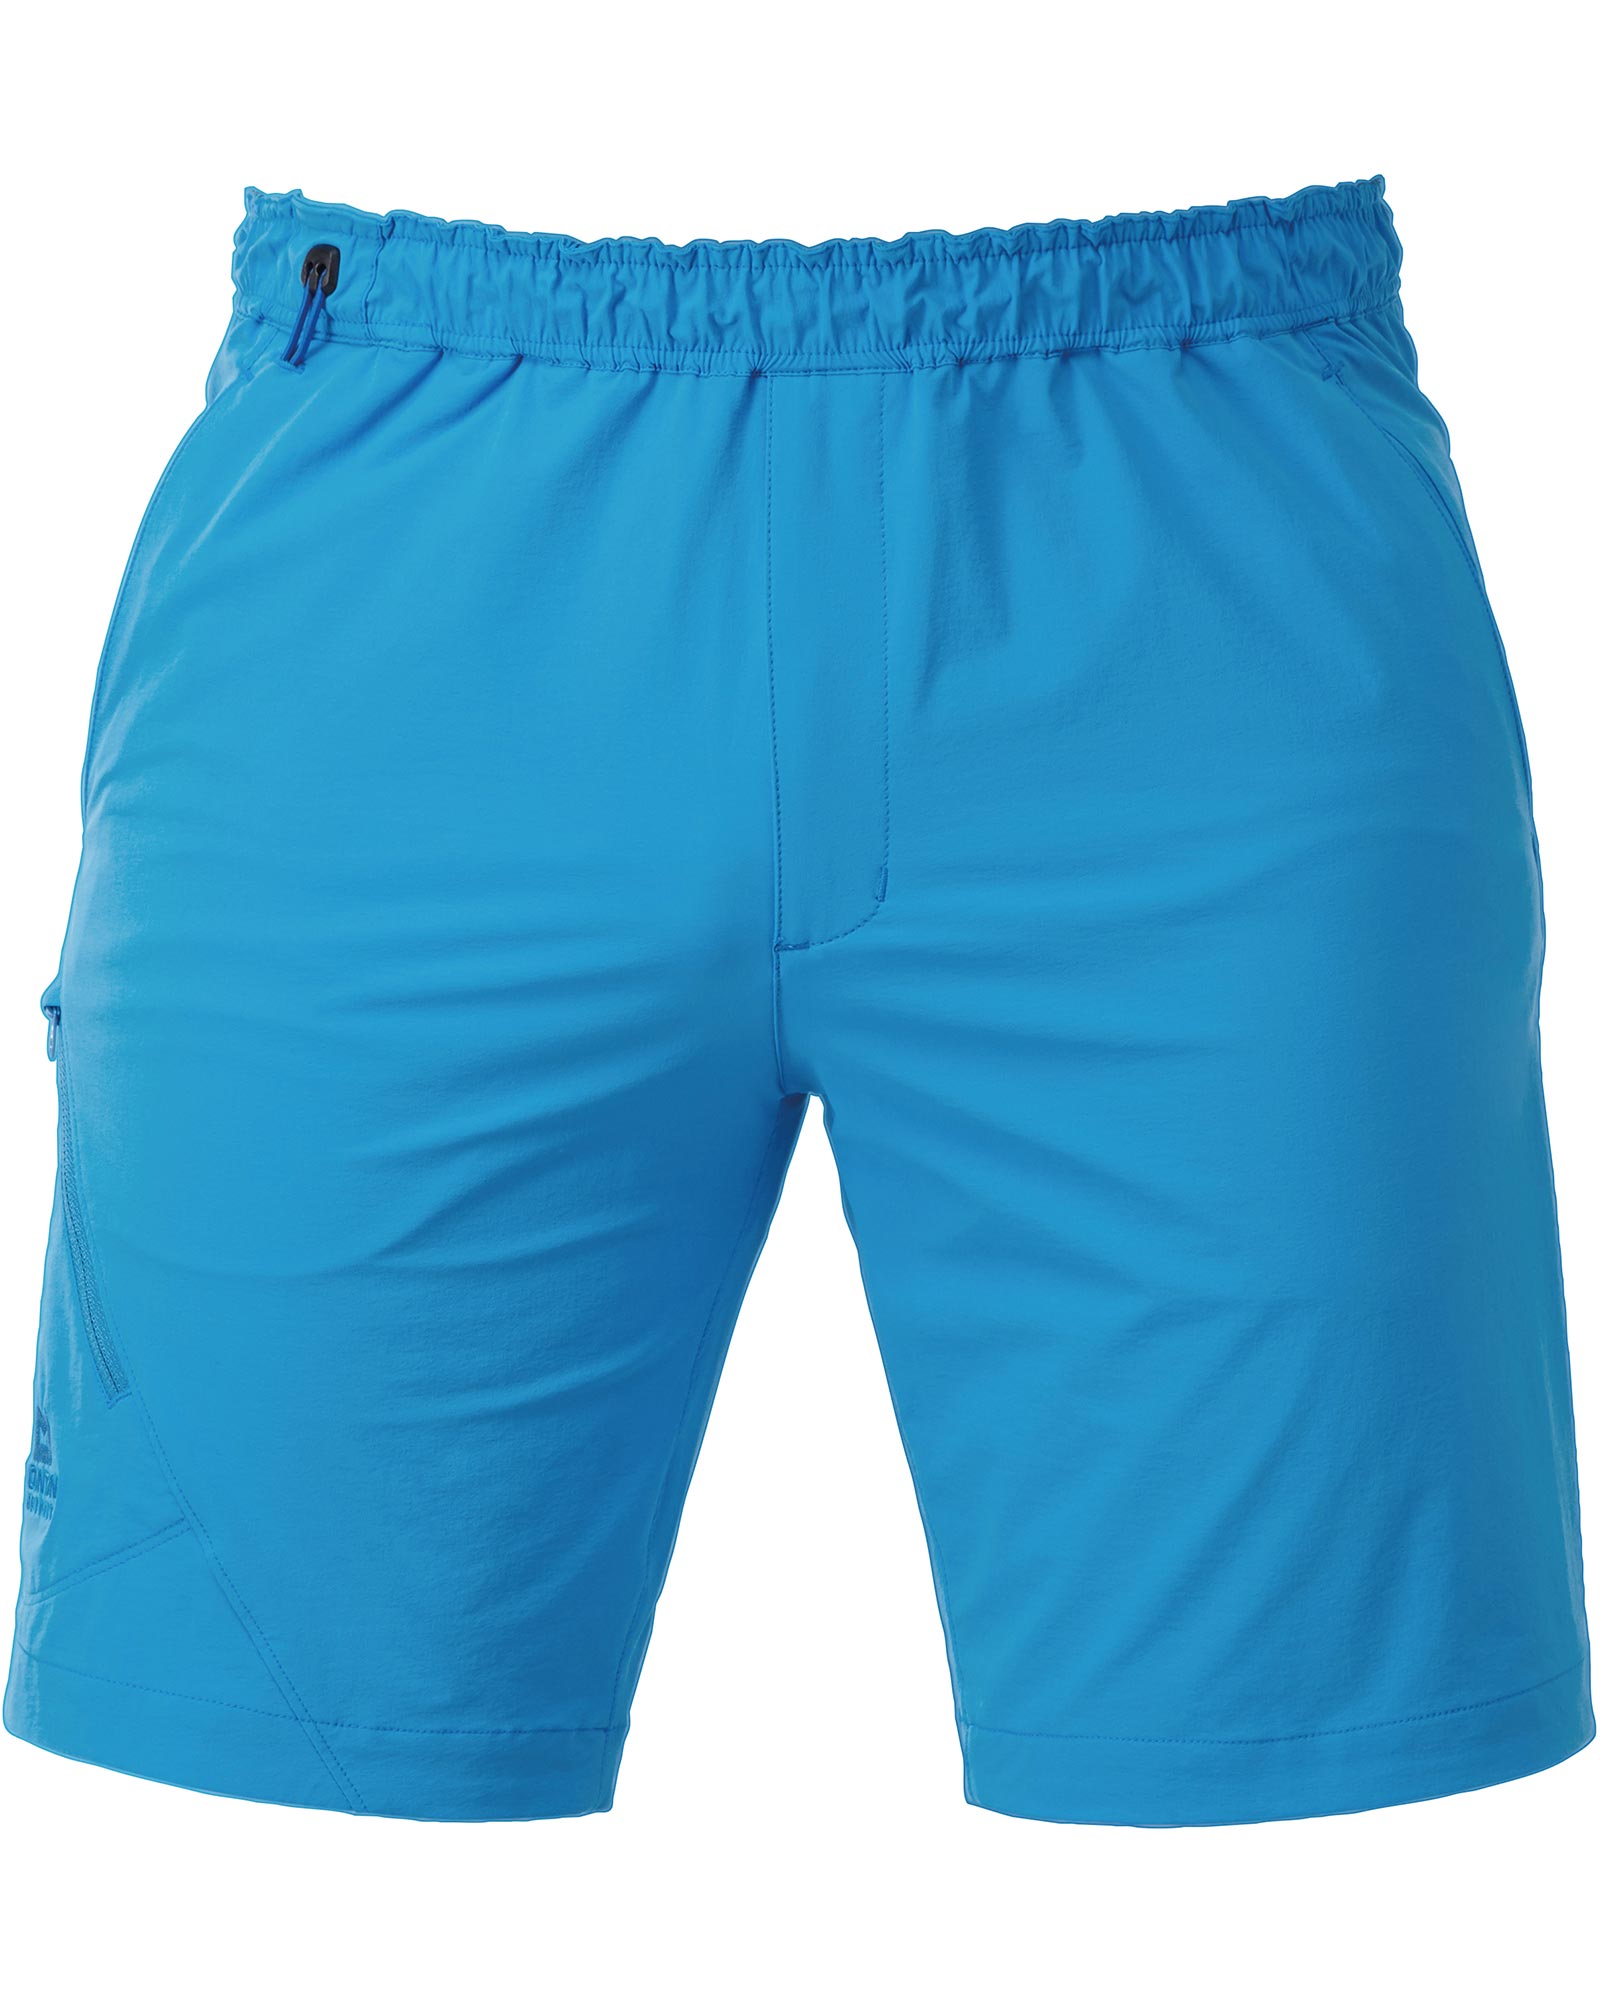 Product image of Mountain equipment Comici Trail Men's Shorts